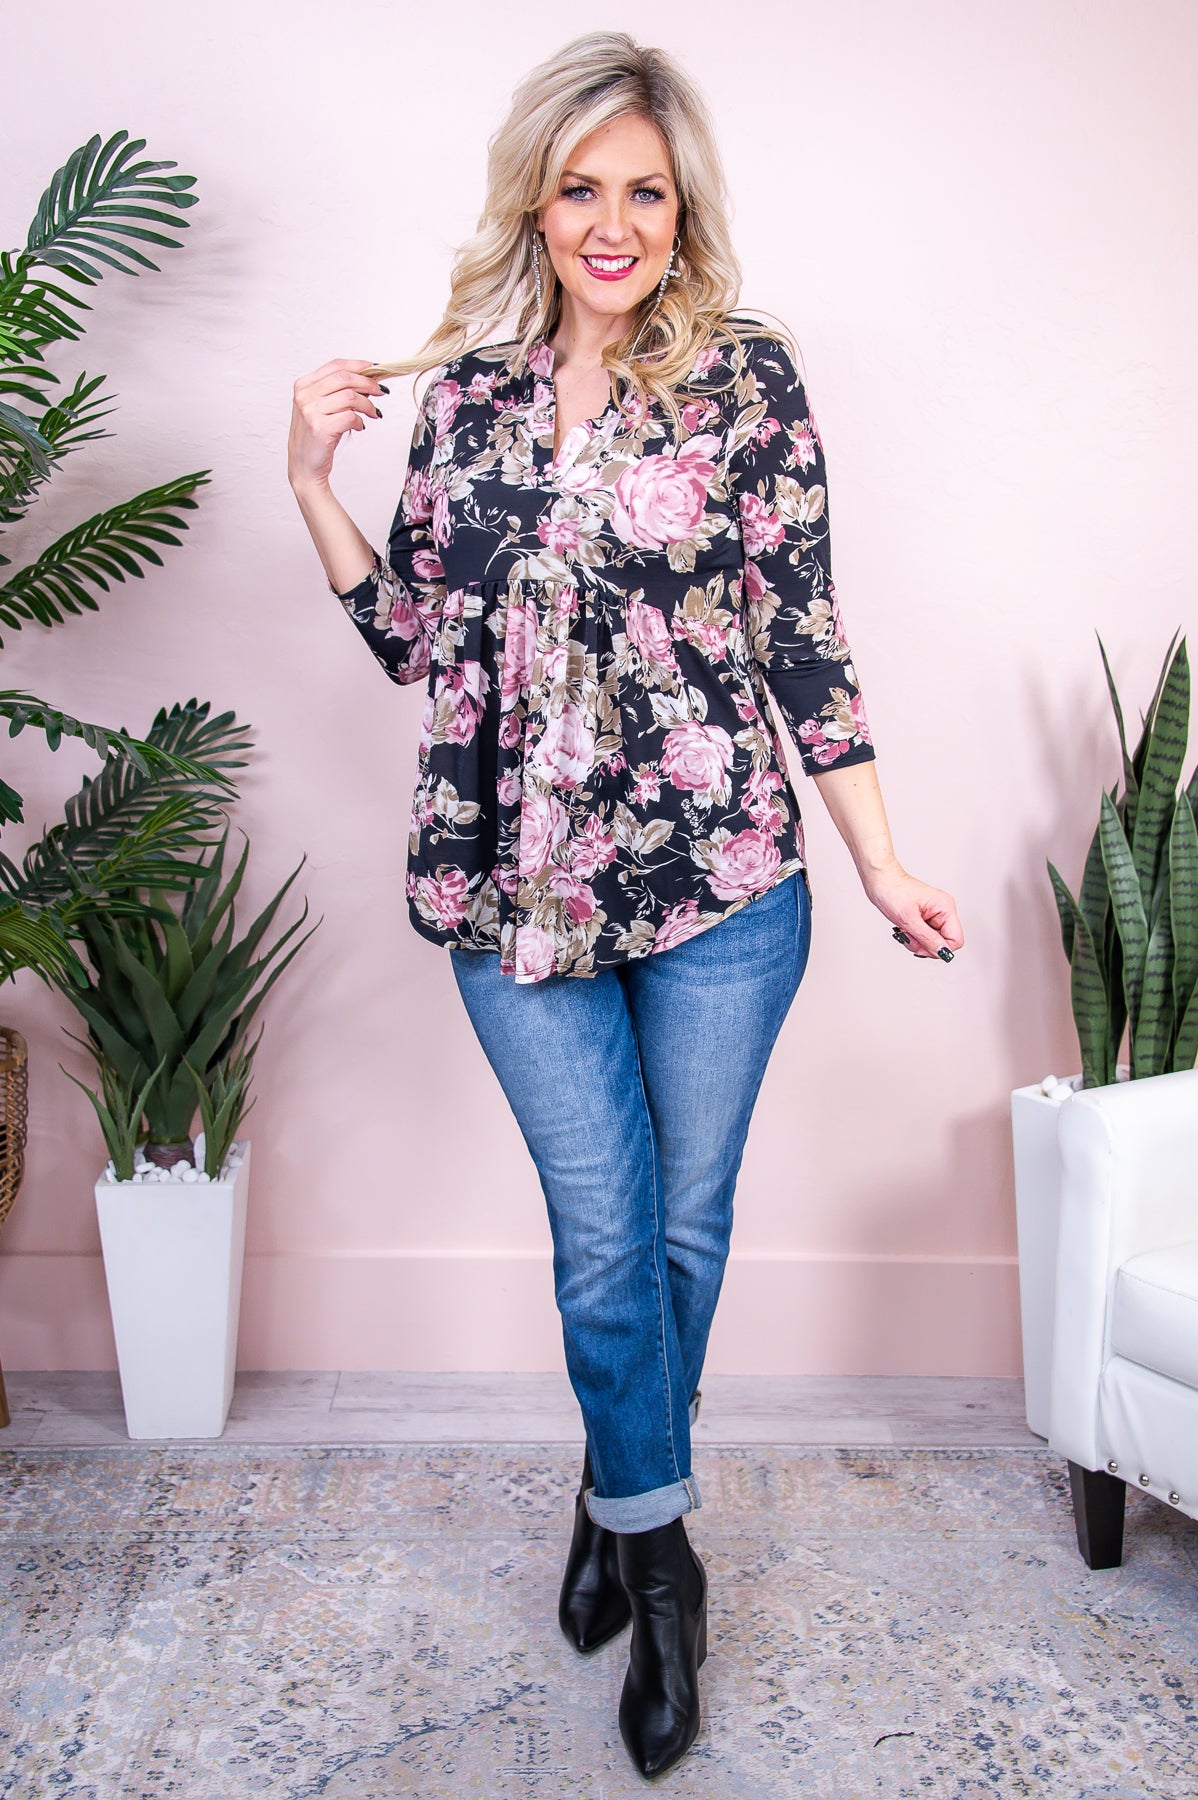 Born With Style Black/Mauve/Gold Floral Babydoll Top - T8691BK